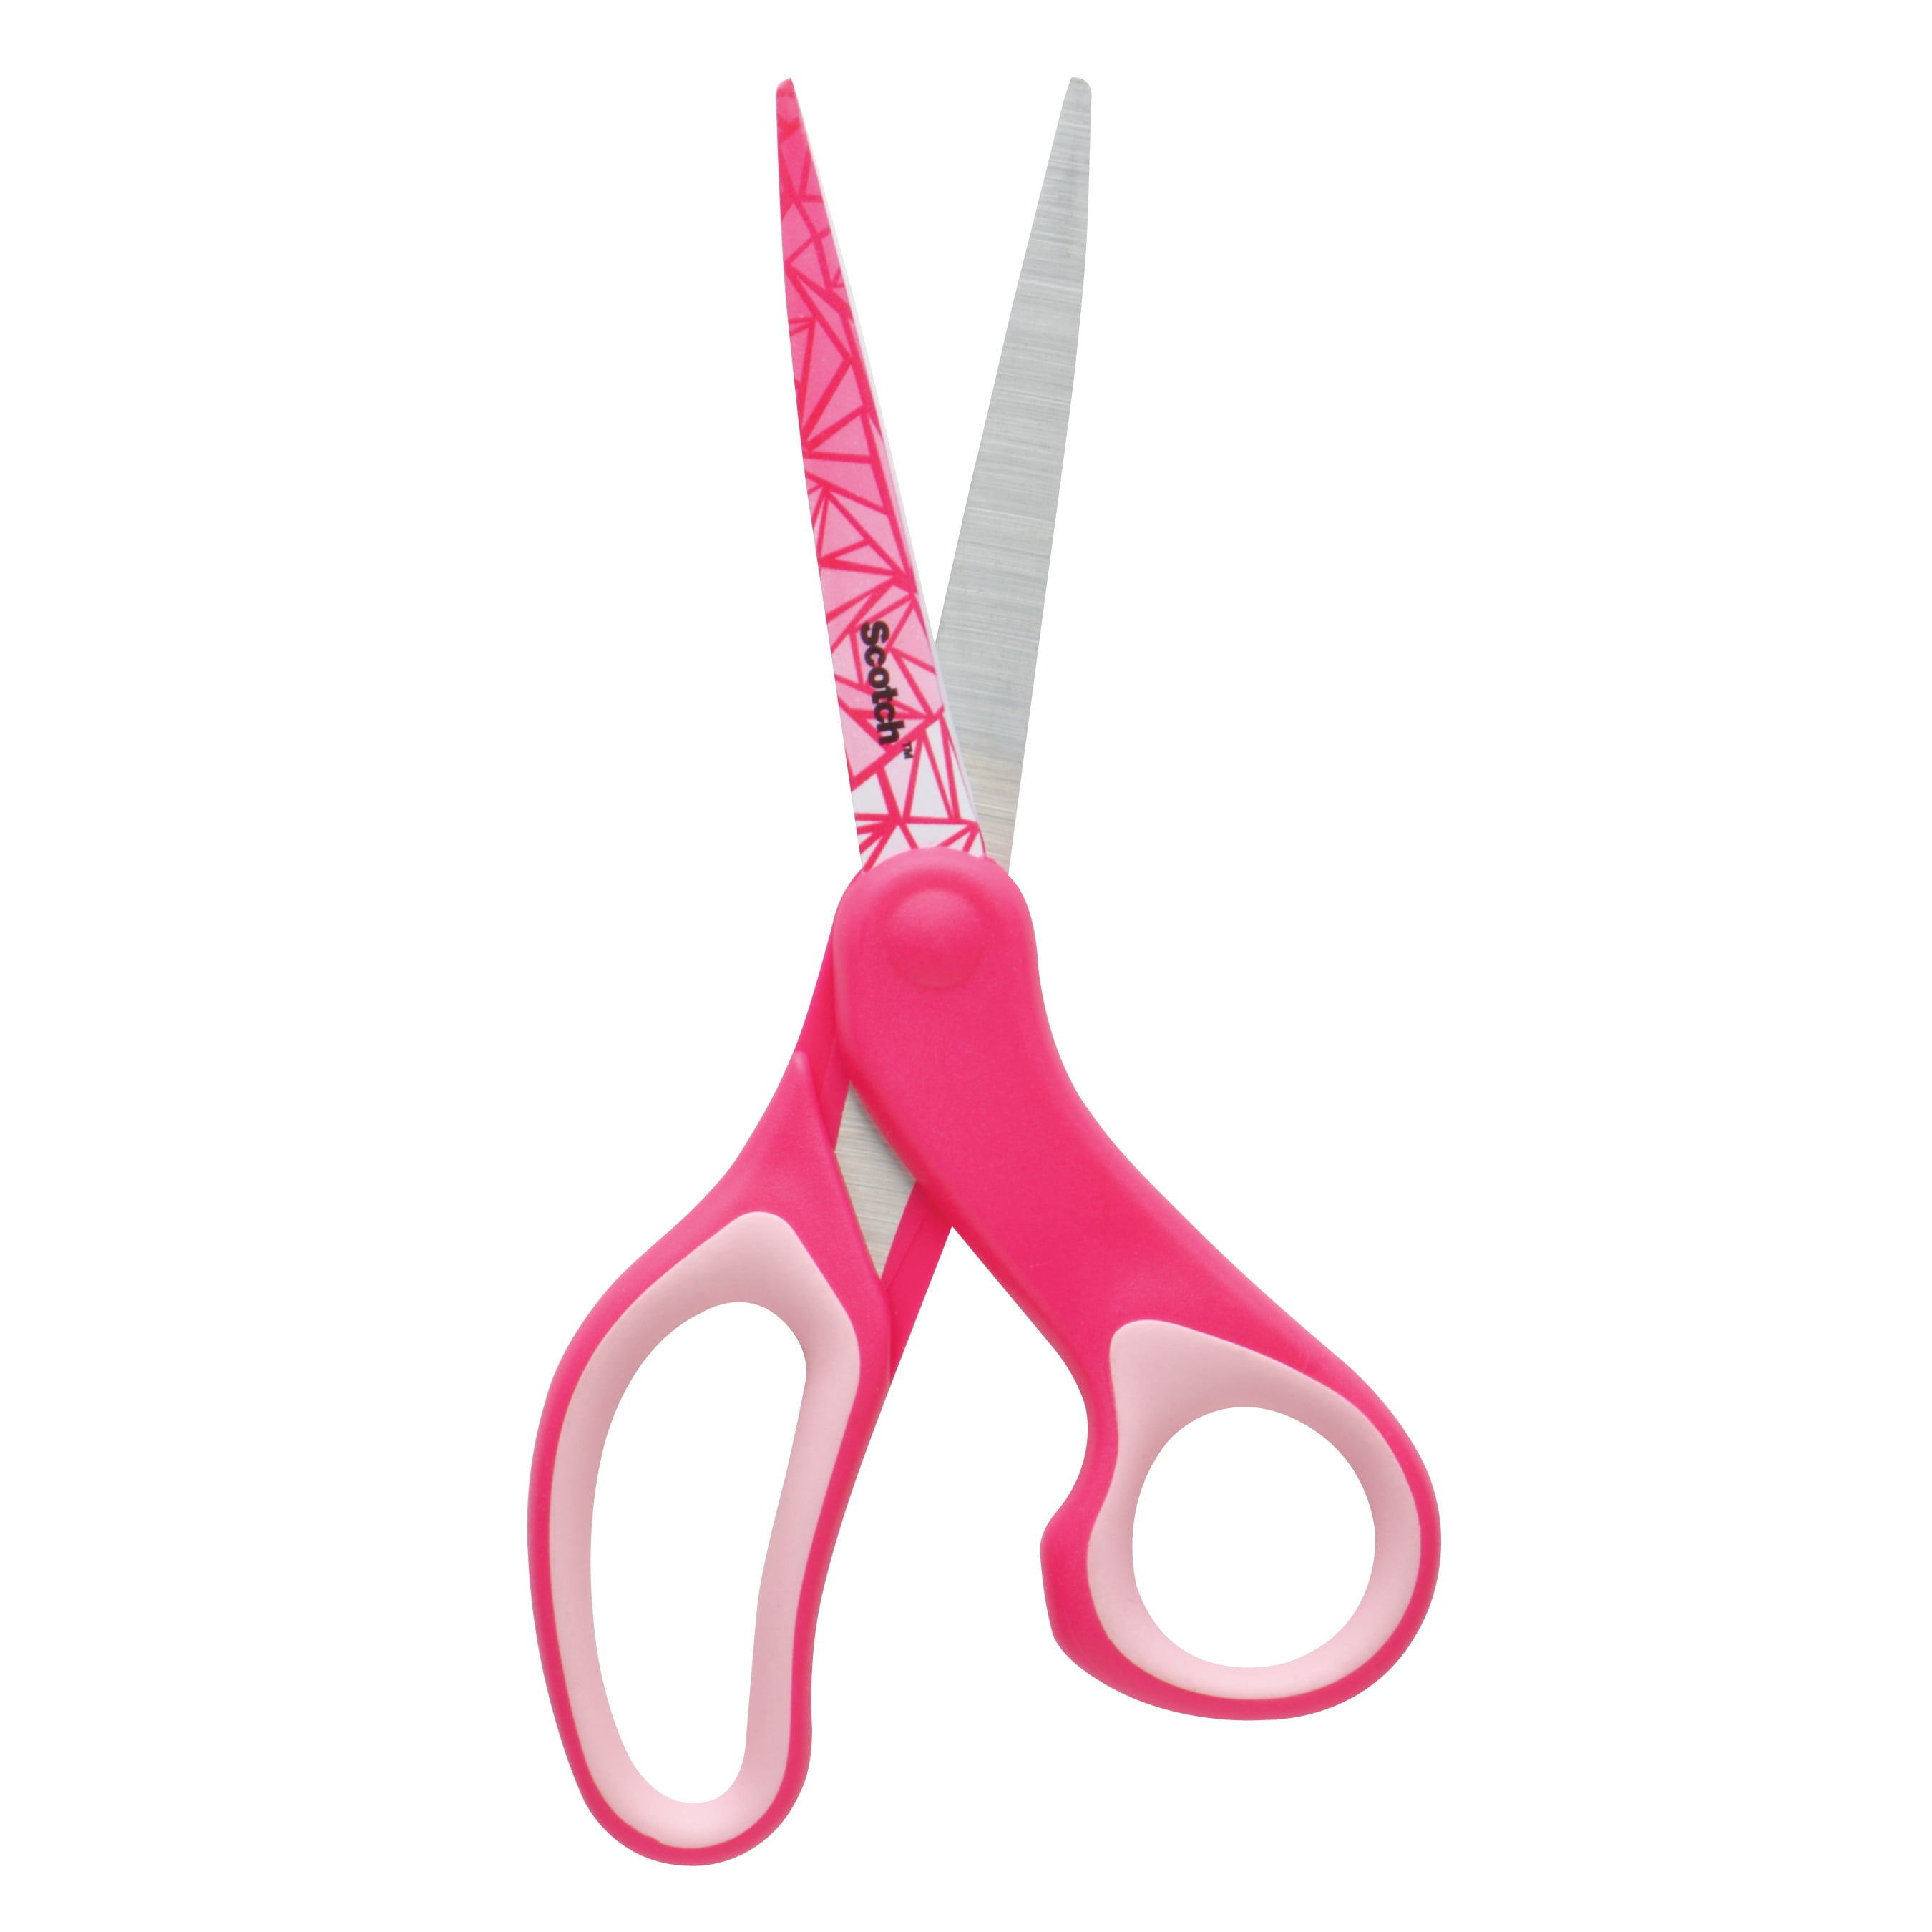 Great Value, Scotch® Multi-Purpose Scissors, 8 Long, 3.38 Cut Length,  Gray/Red Straight Handle by 3M/COMMERCIAL TAPE DIV.